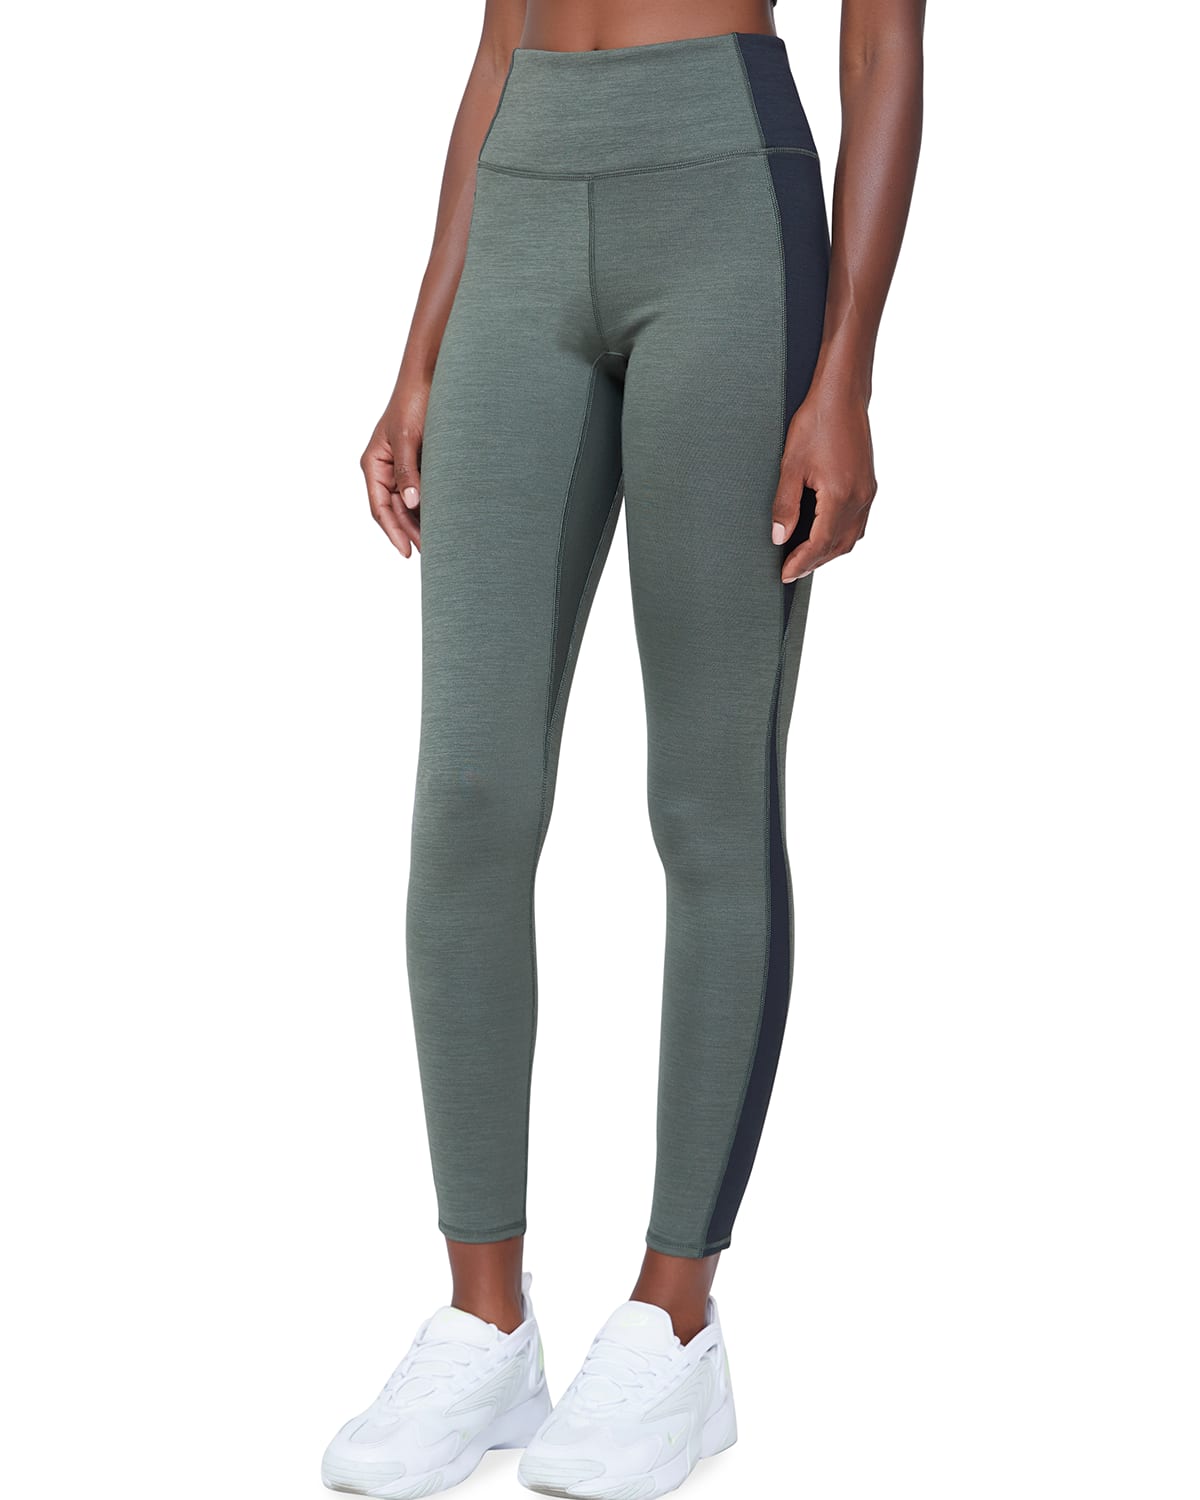 Voice Of Insiders Seacell Colorblock X Leggings In Green Heather